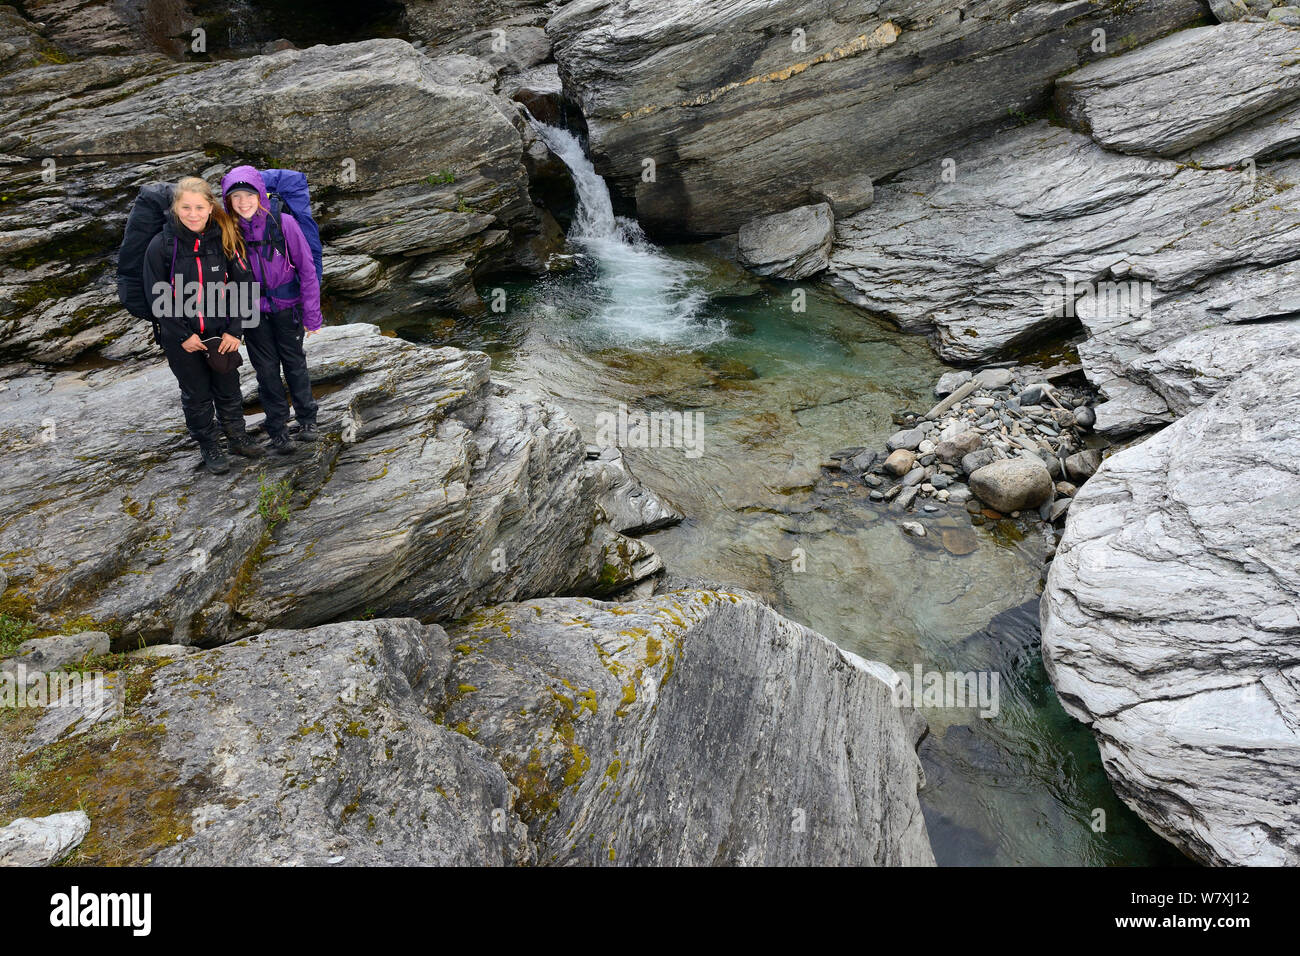 Two teenage girls standing by waterfall, on family hiking trip. Laponia Circuit, along the Padjelantaleden trail, Padjelanta National Park and Sarek National Park, Norrbotten, Lapland, Sweden. Model released Stock Photo